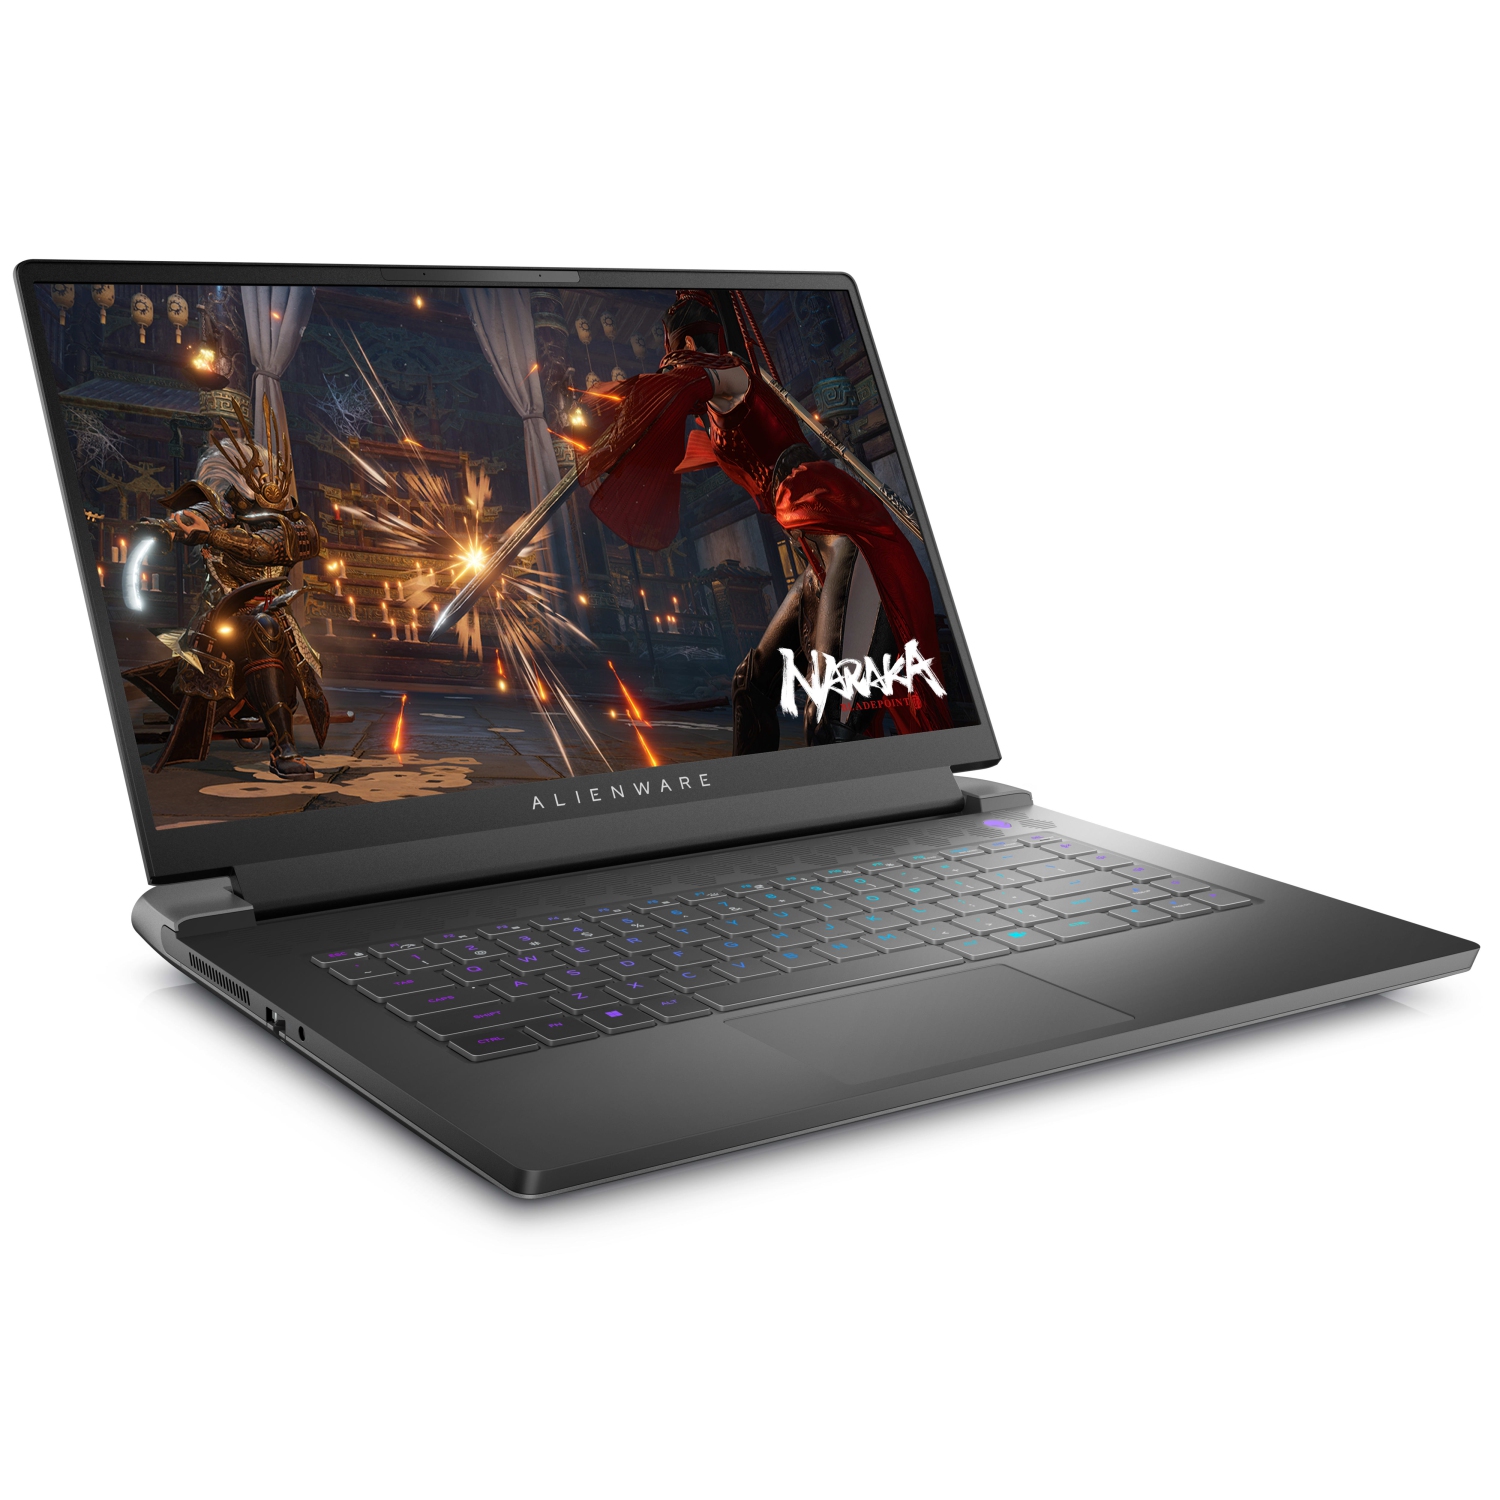 Refurbished (Excellent) – Dell Alienware m15 R7 Gaming Laptop (2022) | 15.6" FHD | Core i7 - 512GB SSD - 16GB RAM - 3070 Ti | 14 Cores @ 4.7 GHz - 12th Gen CPU - 8GB GDDR6X